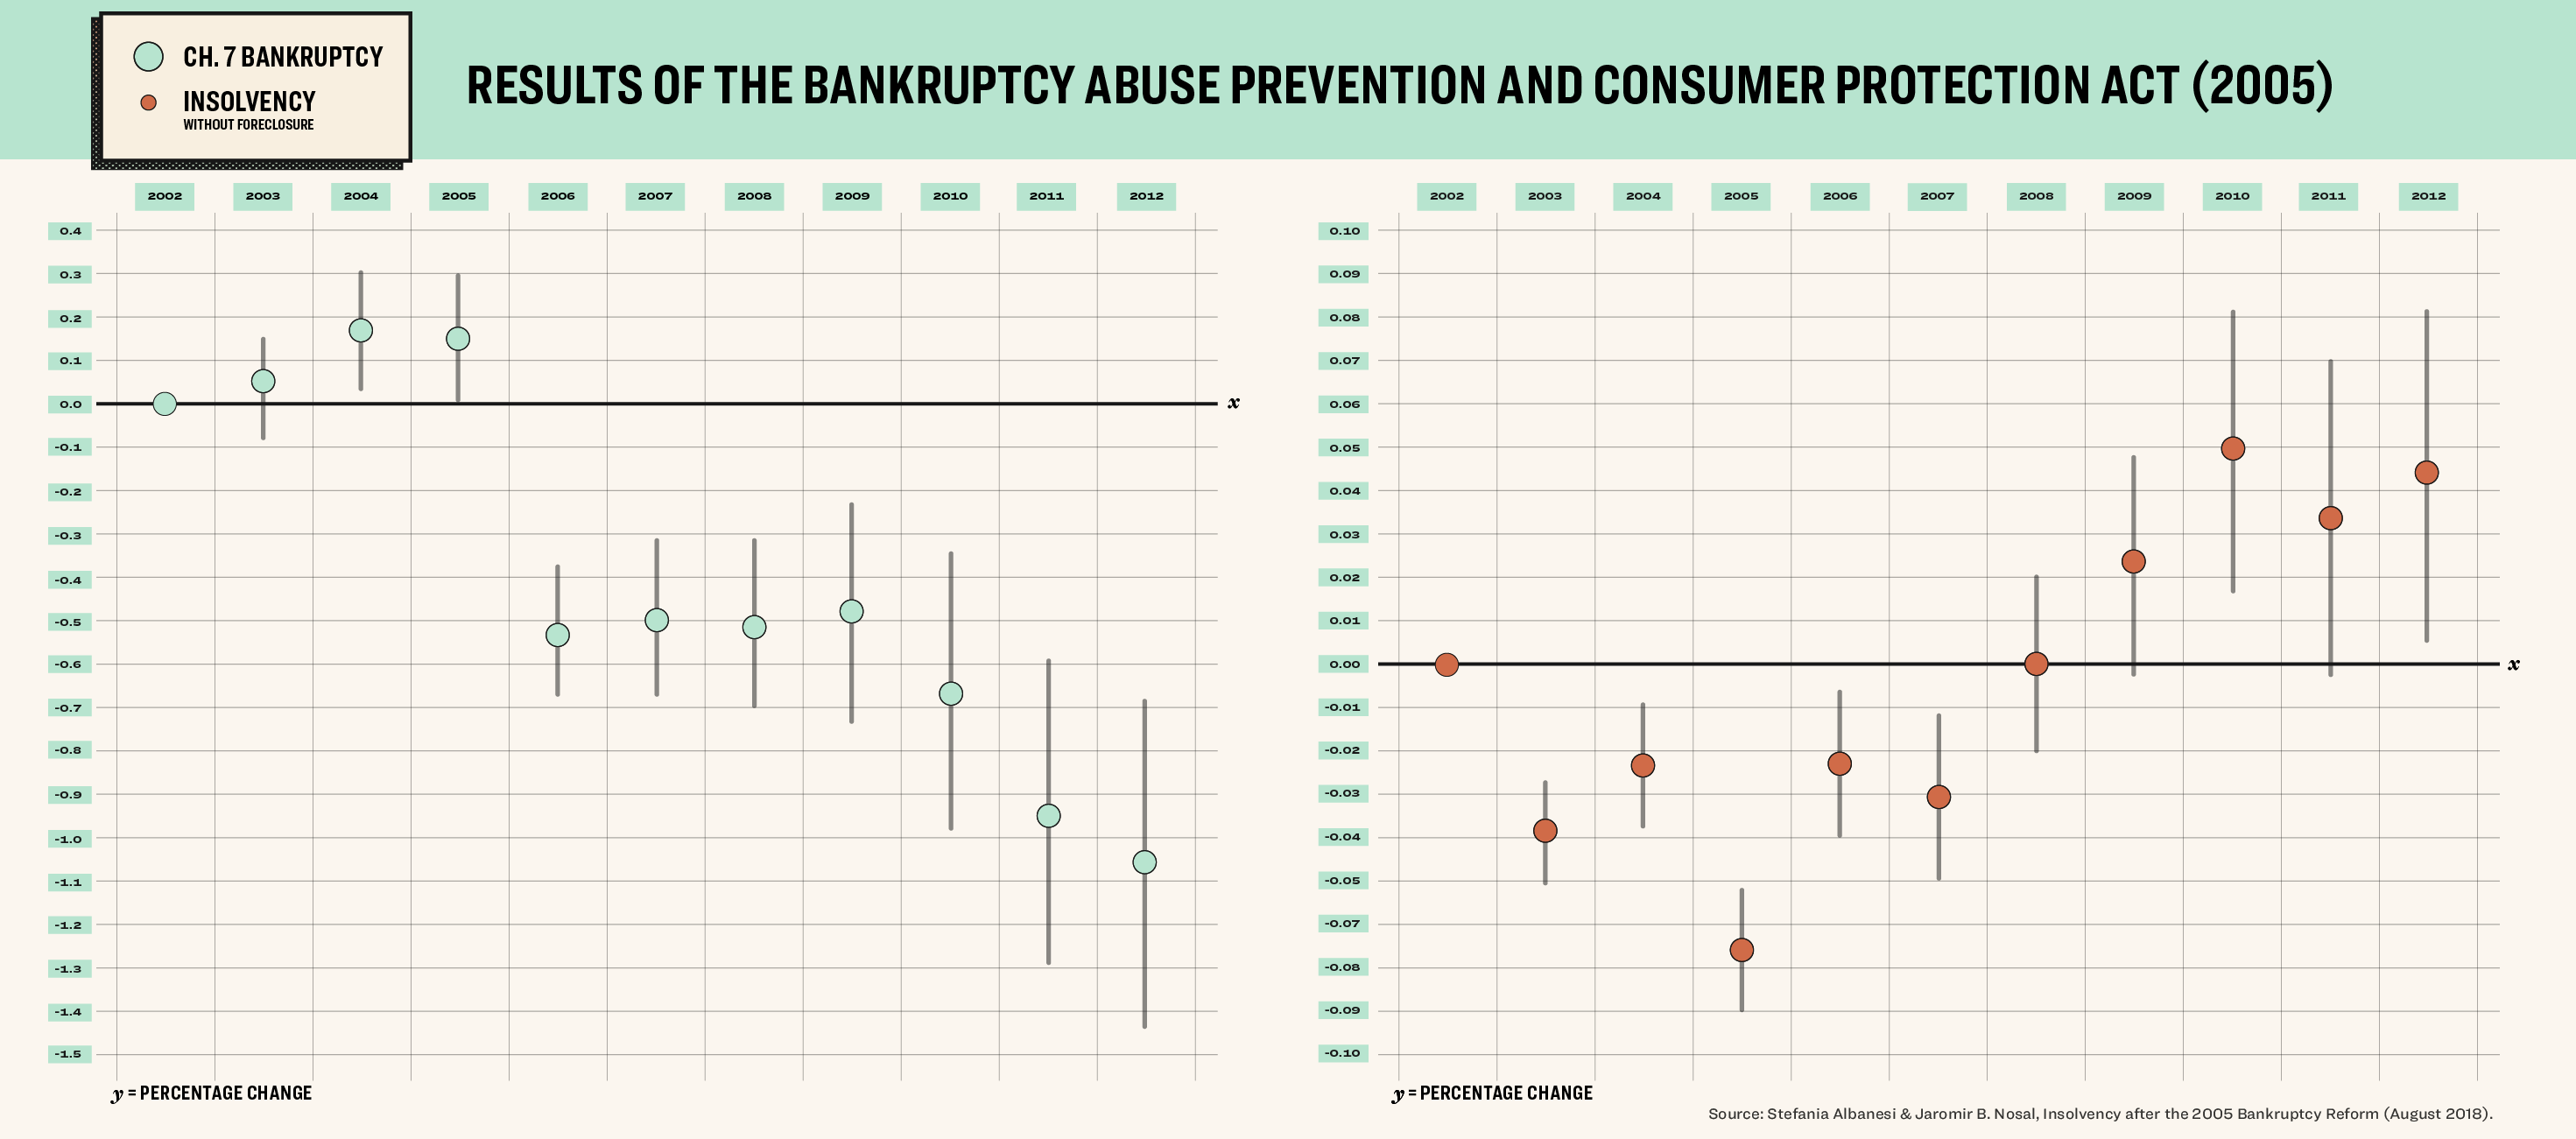 Header: Results of the Bankruptcy Abuse Prevention and Consumer Protection Act (2005)
The graph shows bankruptcy filings declining and insolvency increasing
Source: https://www.jaromirnosal.net/uploads/6/0/7/5/60756213/draft_august2018.pdf
